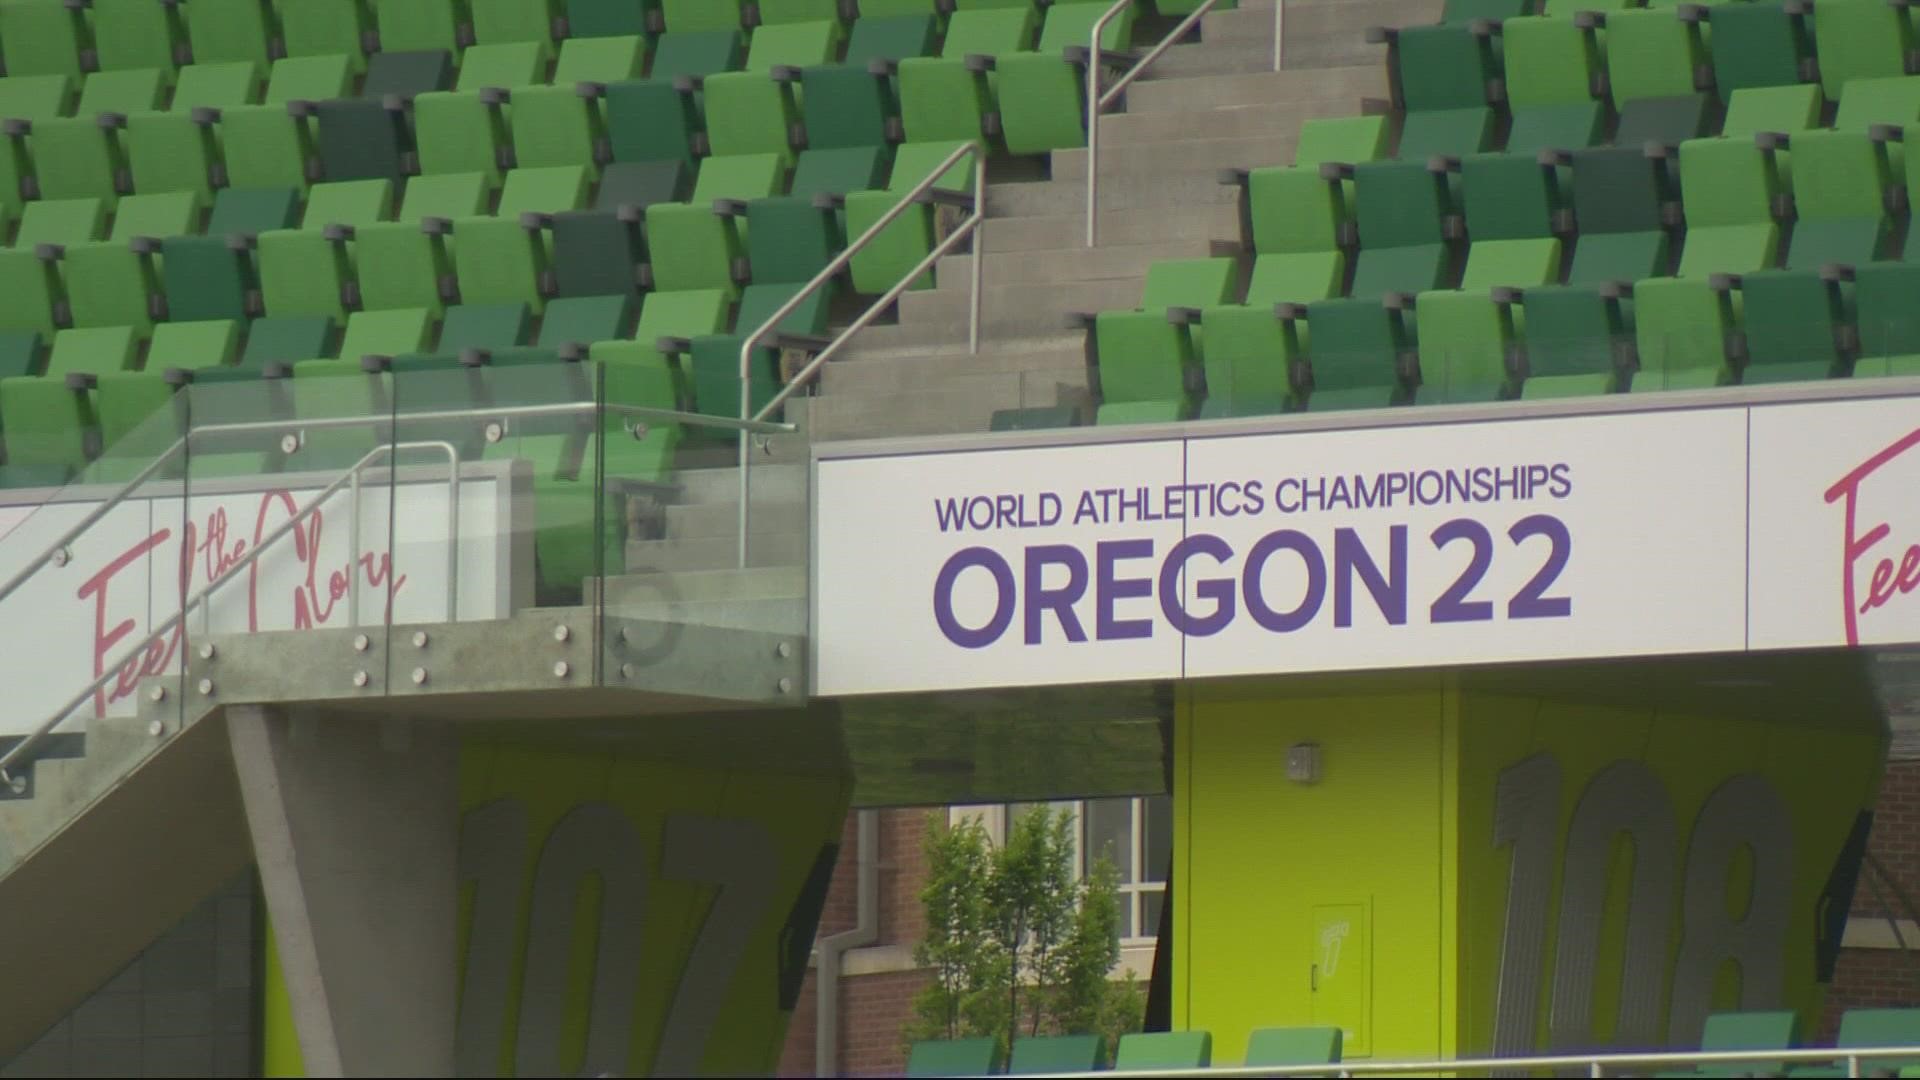 Administrators made the announcement as UO stands at the center of the track and field universe for the World Athletics Championships.